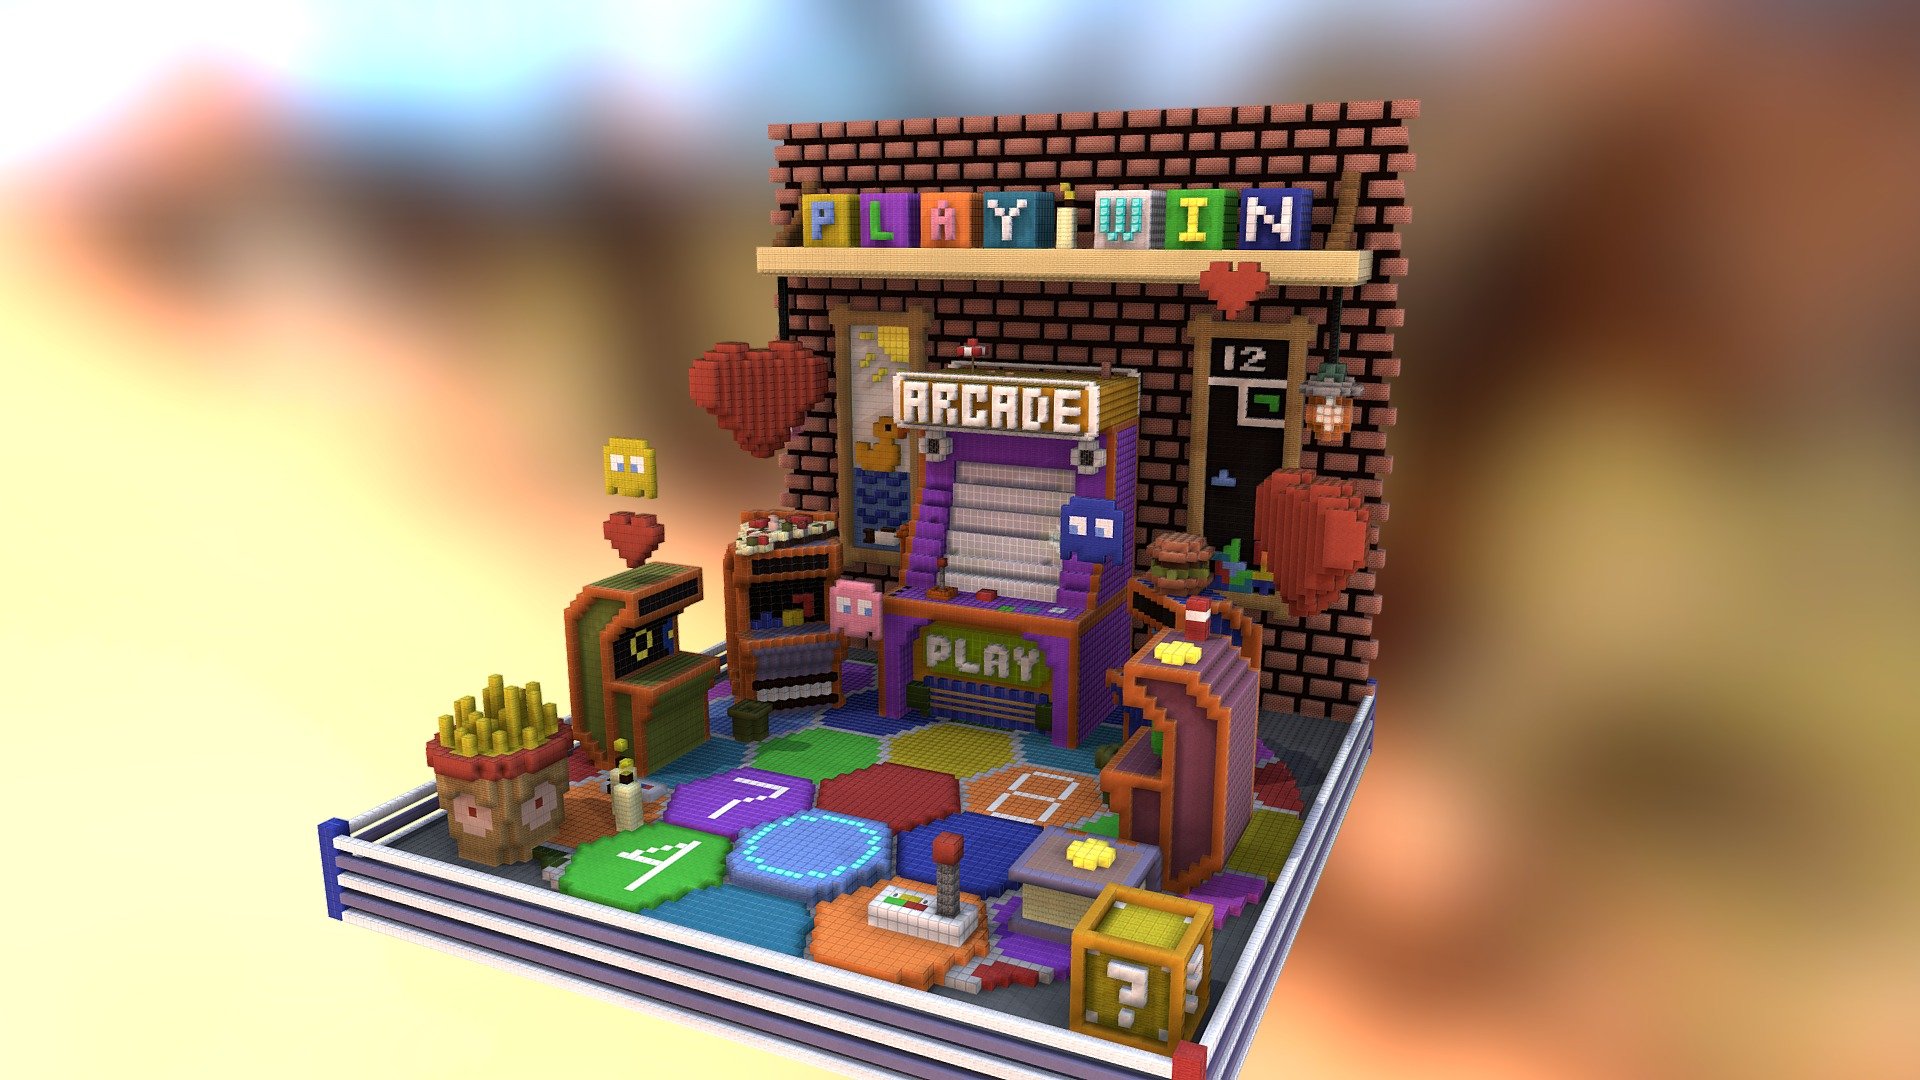 ArcadeLobby

A compact arcade lobby for your server. Look screenshots before purchase! map was created for servers 1.8 and higher! If you have questions, write to us CreativeDucks#8951. Quack quack &hellip;

Size 90x90x80 - Arcade Lobby - 3D model by CreativeDucks (@BuildingDucks) 3d model